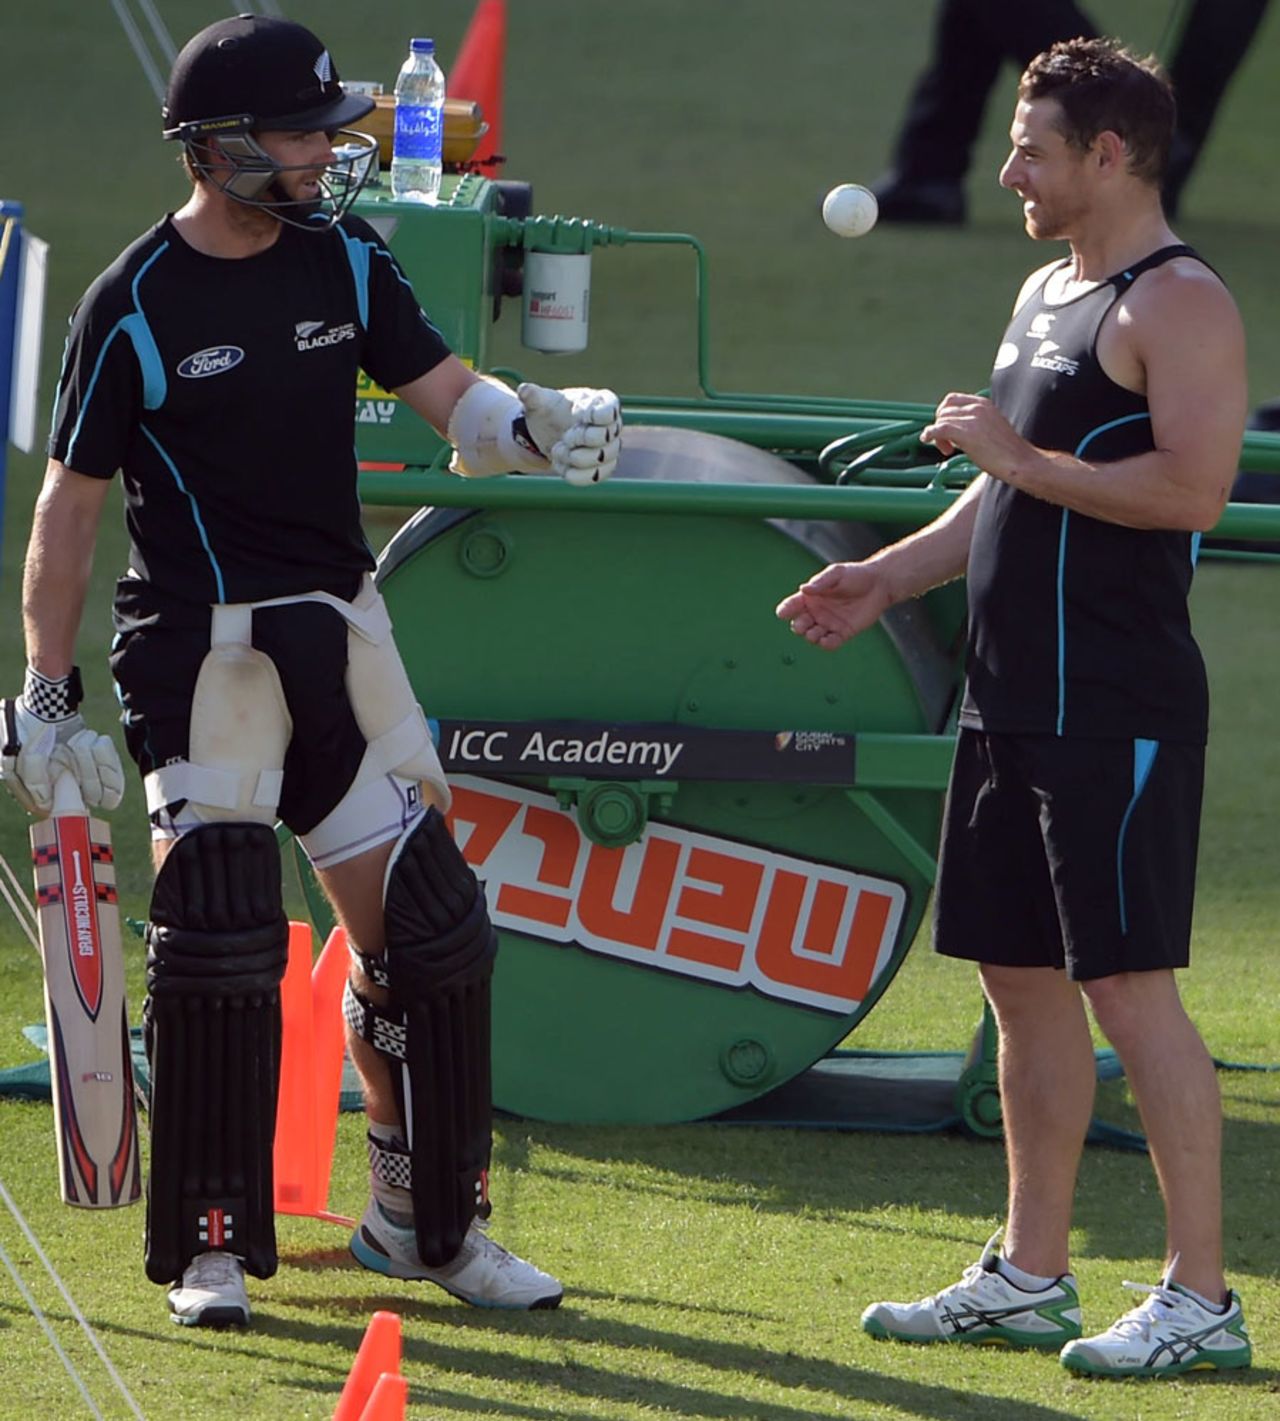 Kane Williamson and Nathan McCullum at a nets session, Dubai, December 3, 2014